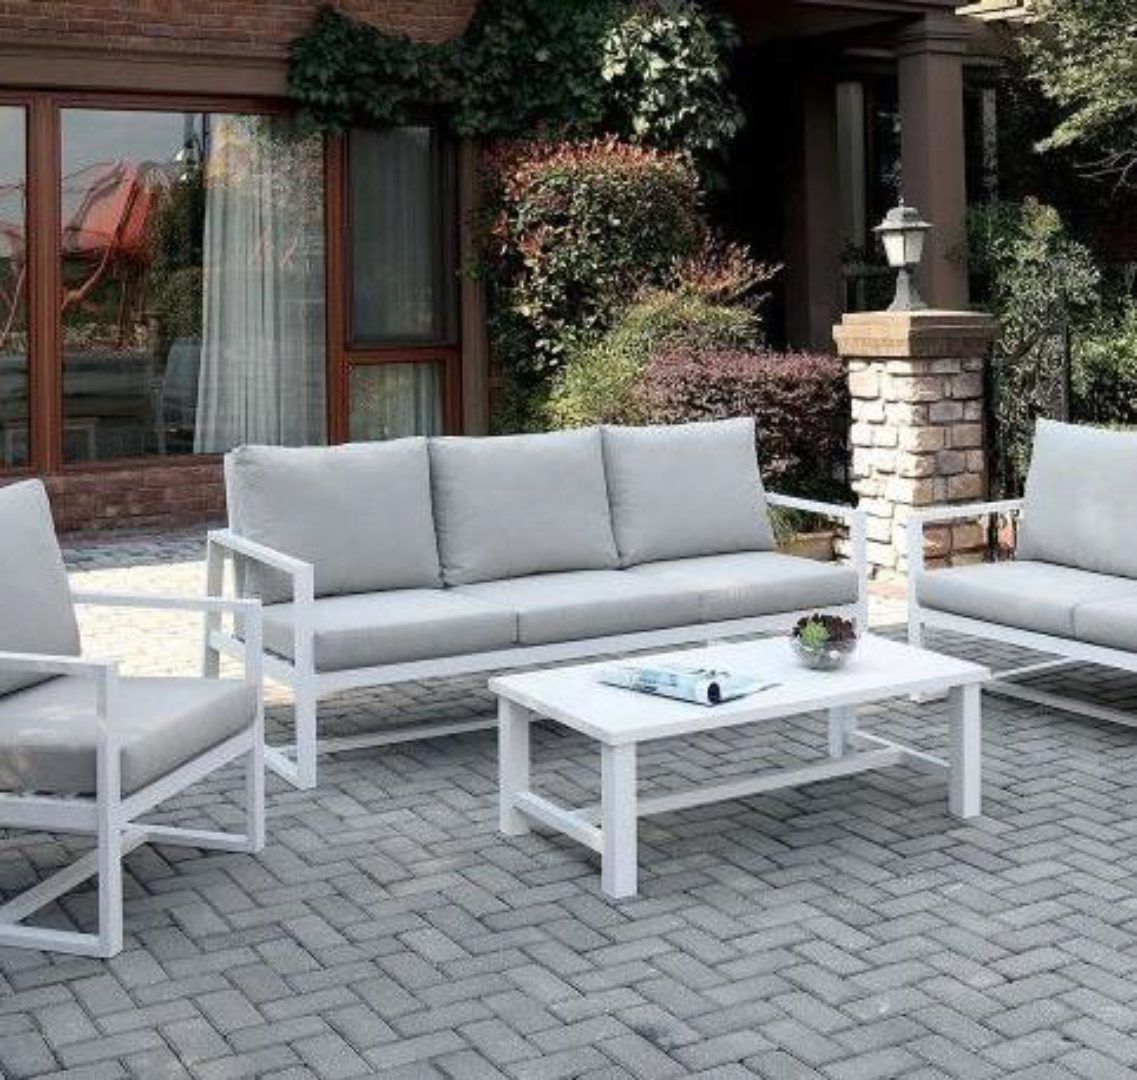 Aluminum Frame Construction Beige Fabric Patio Sofa Set Intended For Ecru And Otter Coffee Tables (View 13 of 15)